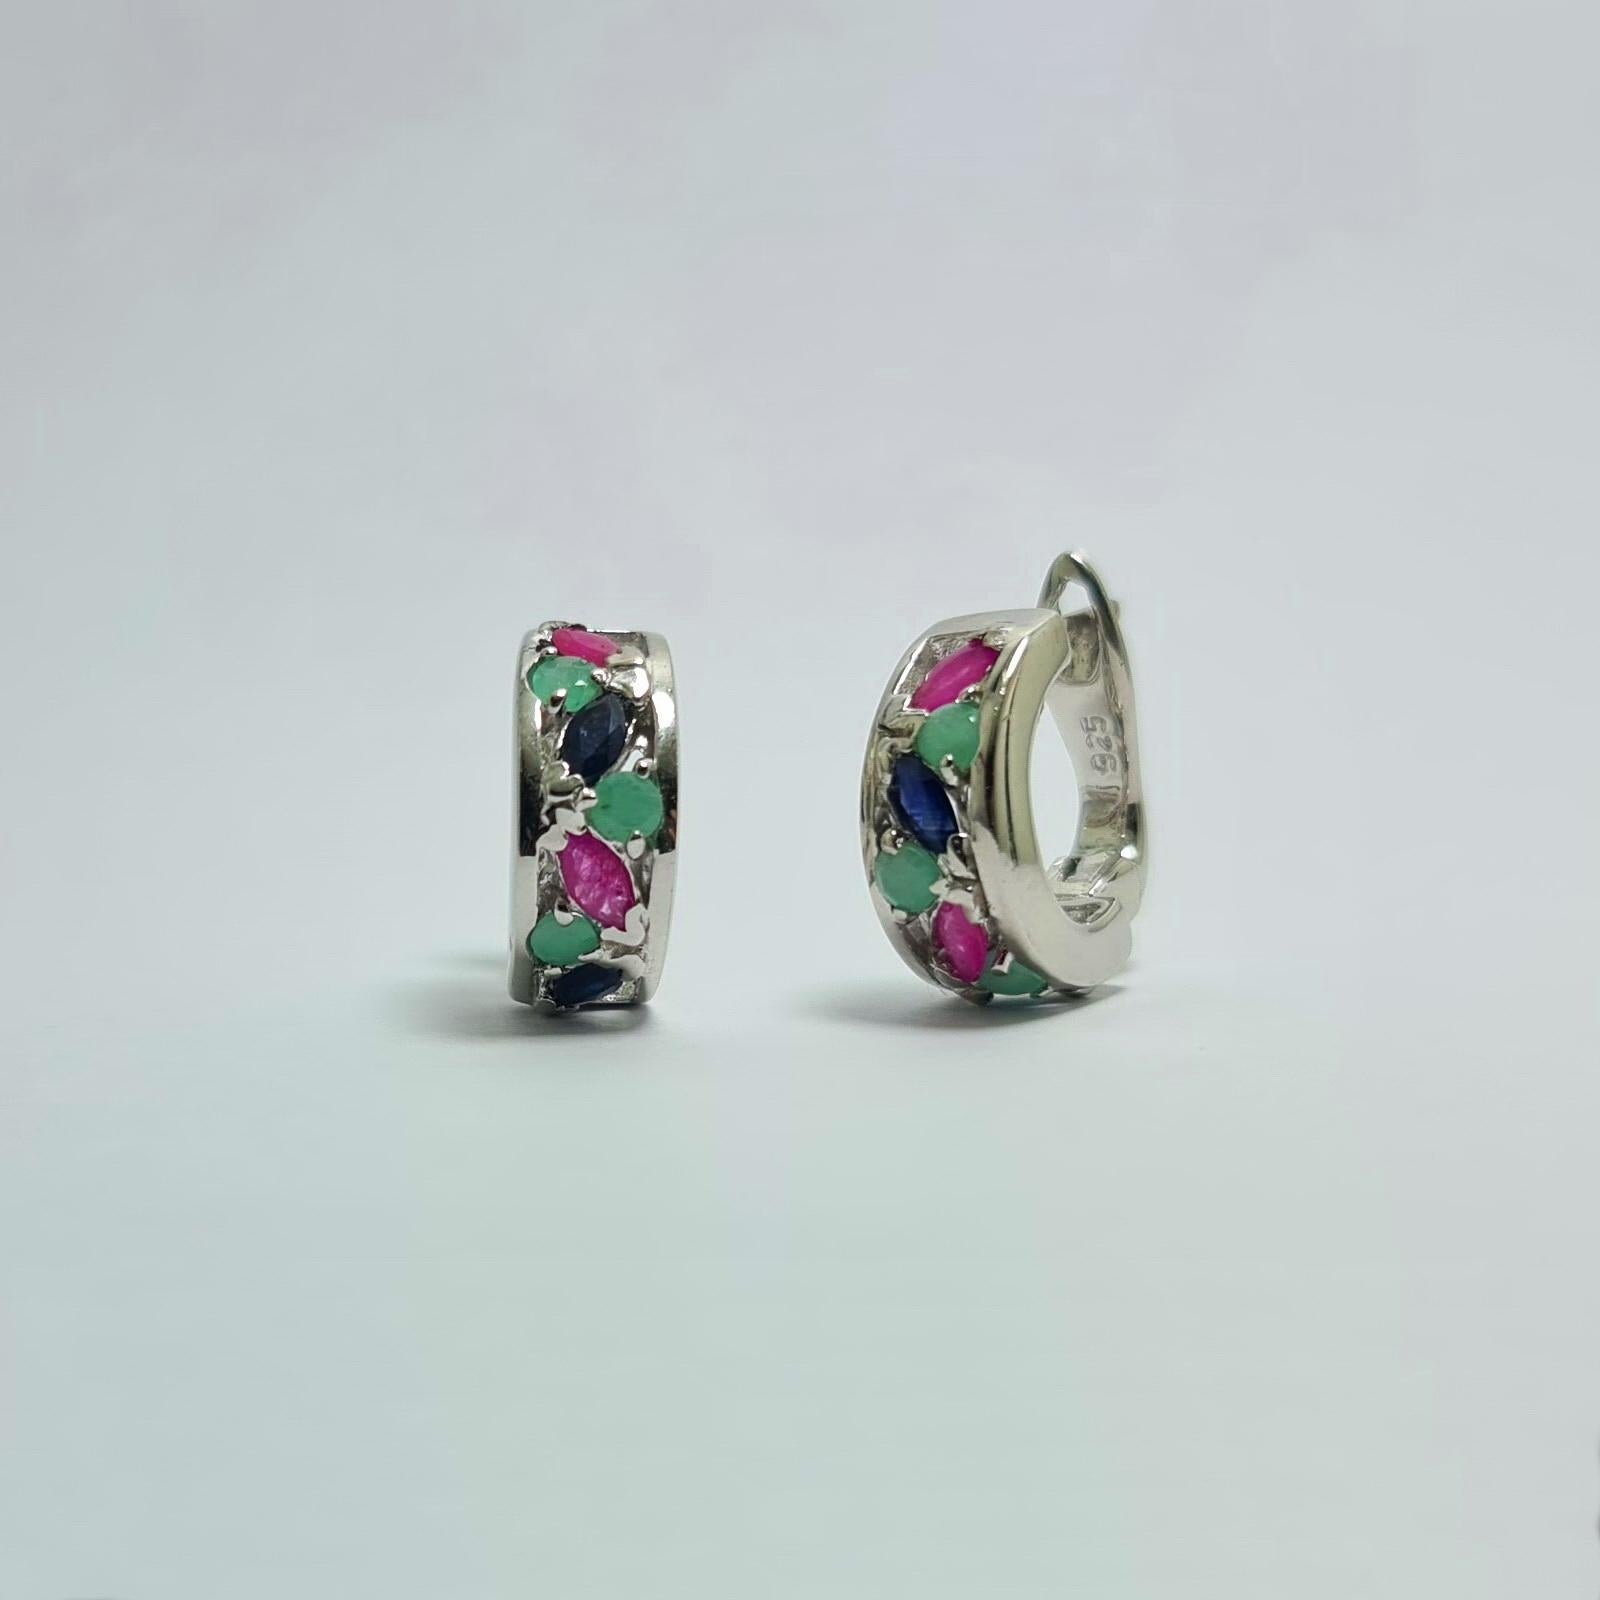 Natural Untreated Emerald Sapphire Ruby 
Solid 925 Sterling Silver Rhodium Plated Earrings 

Total weight of the earrings: 8.5 grams
Total weight of the stones: 5 carats